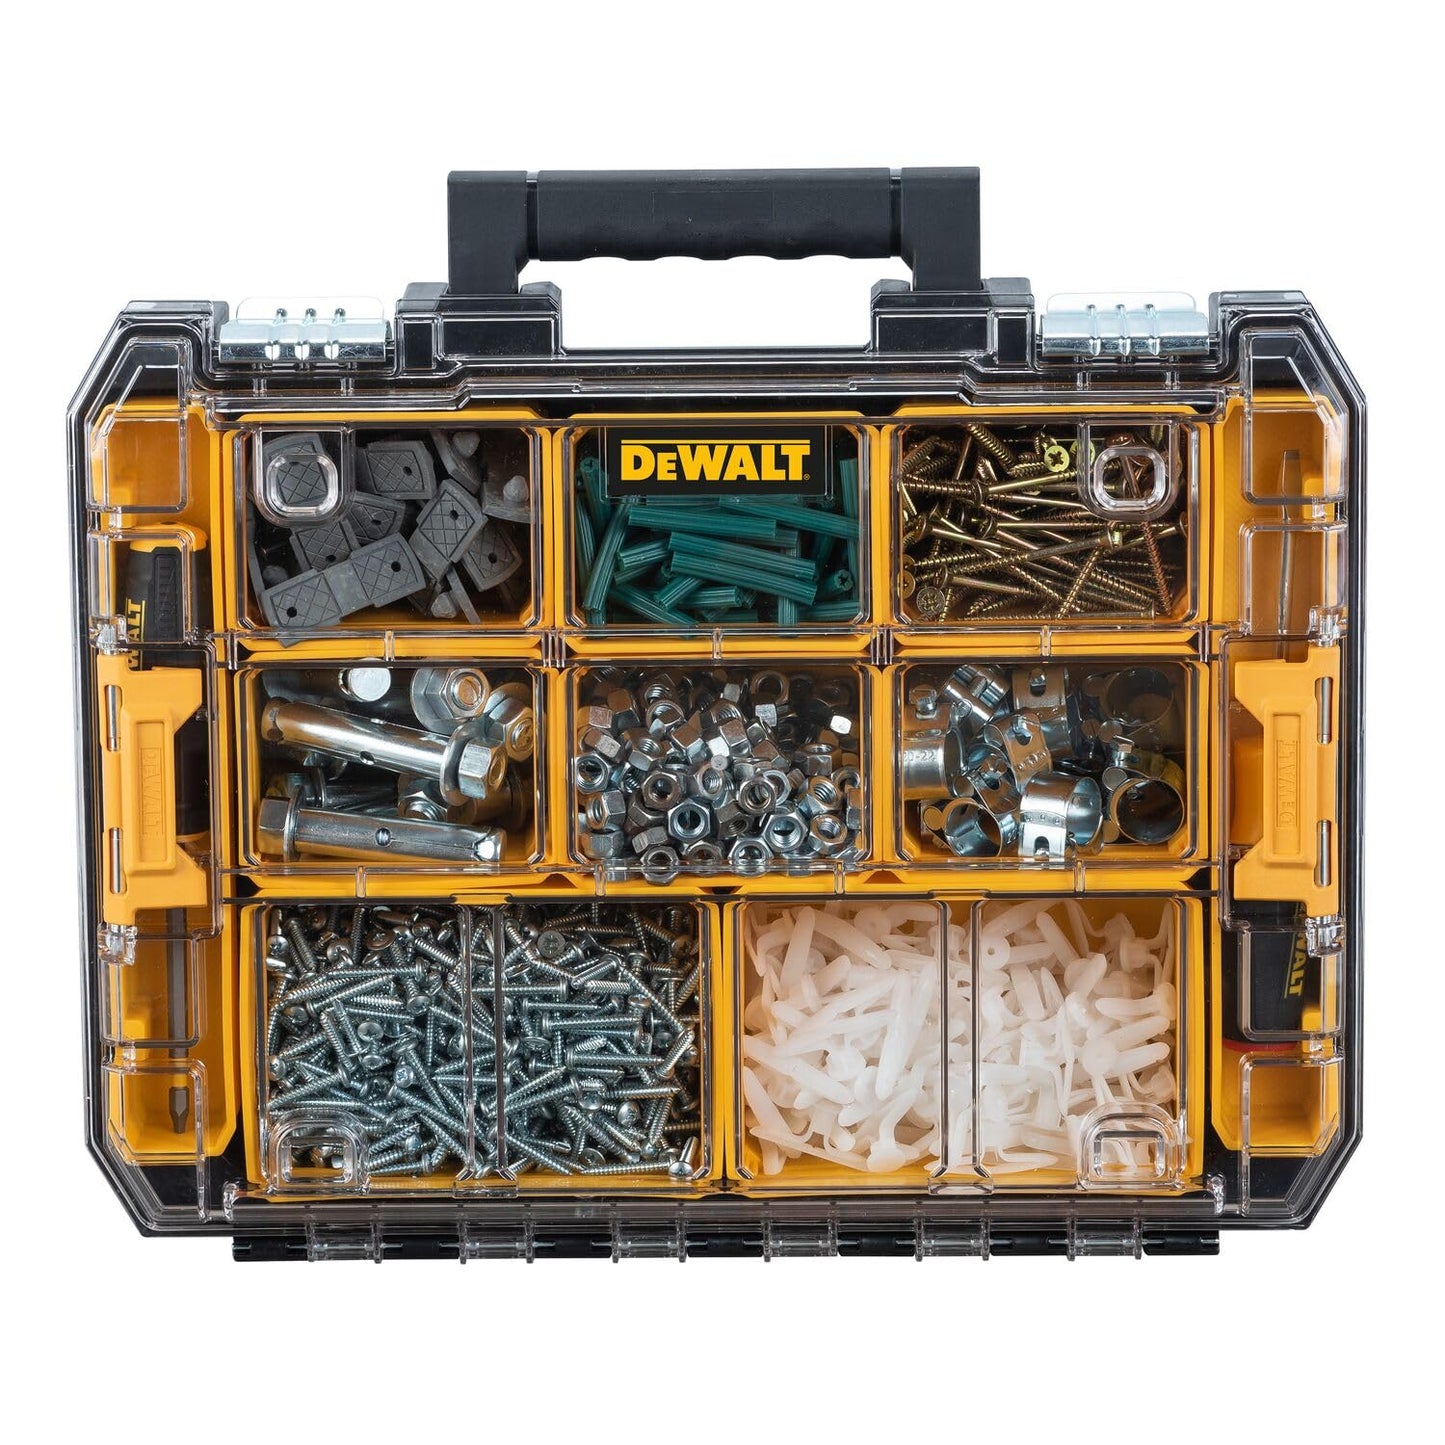 DEWALT TSTAK Tool Organizer, Small Parts Tool Box with Removable Compartments (DWST17805)